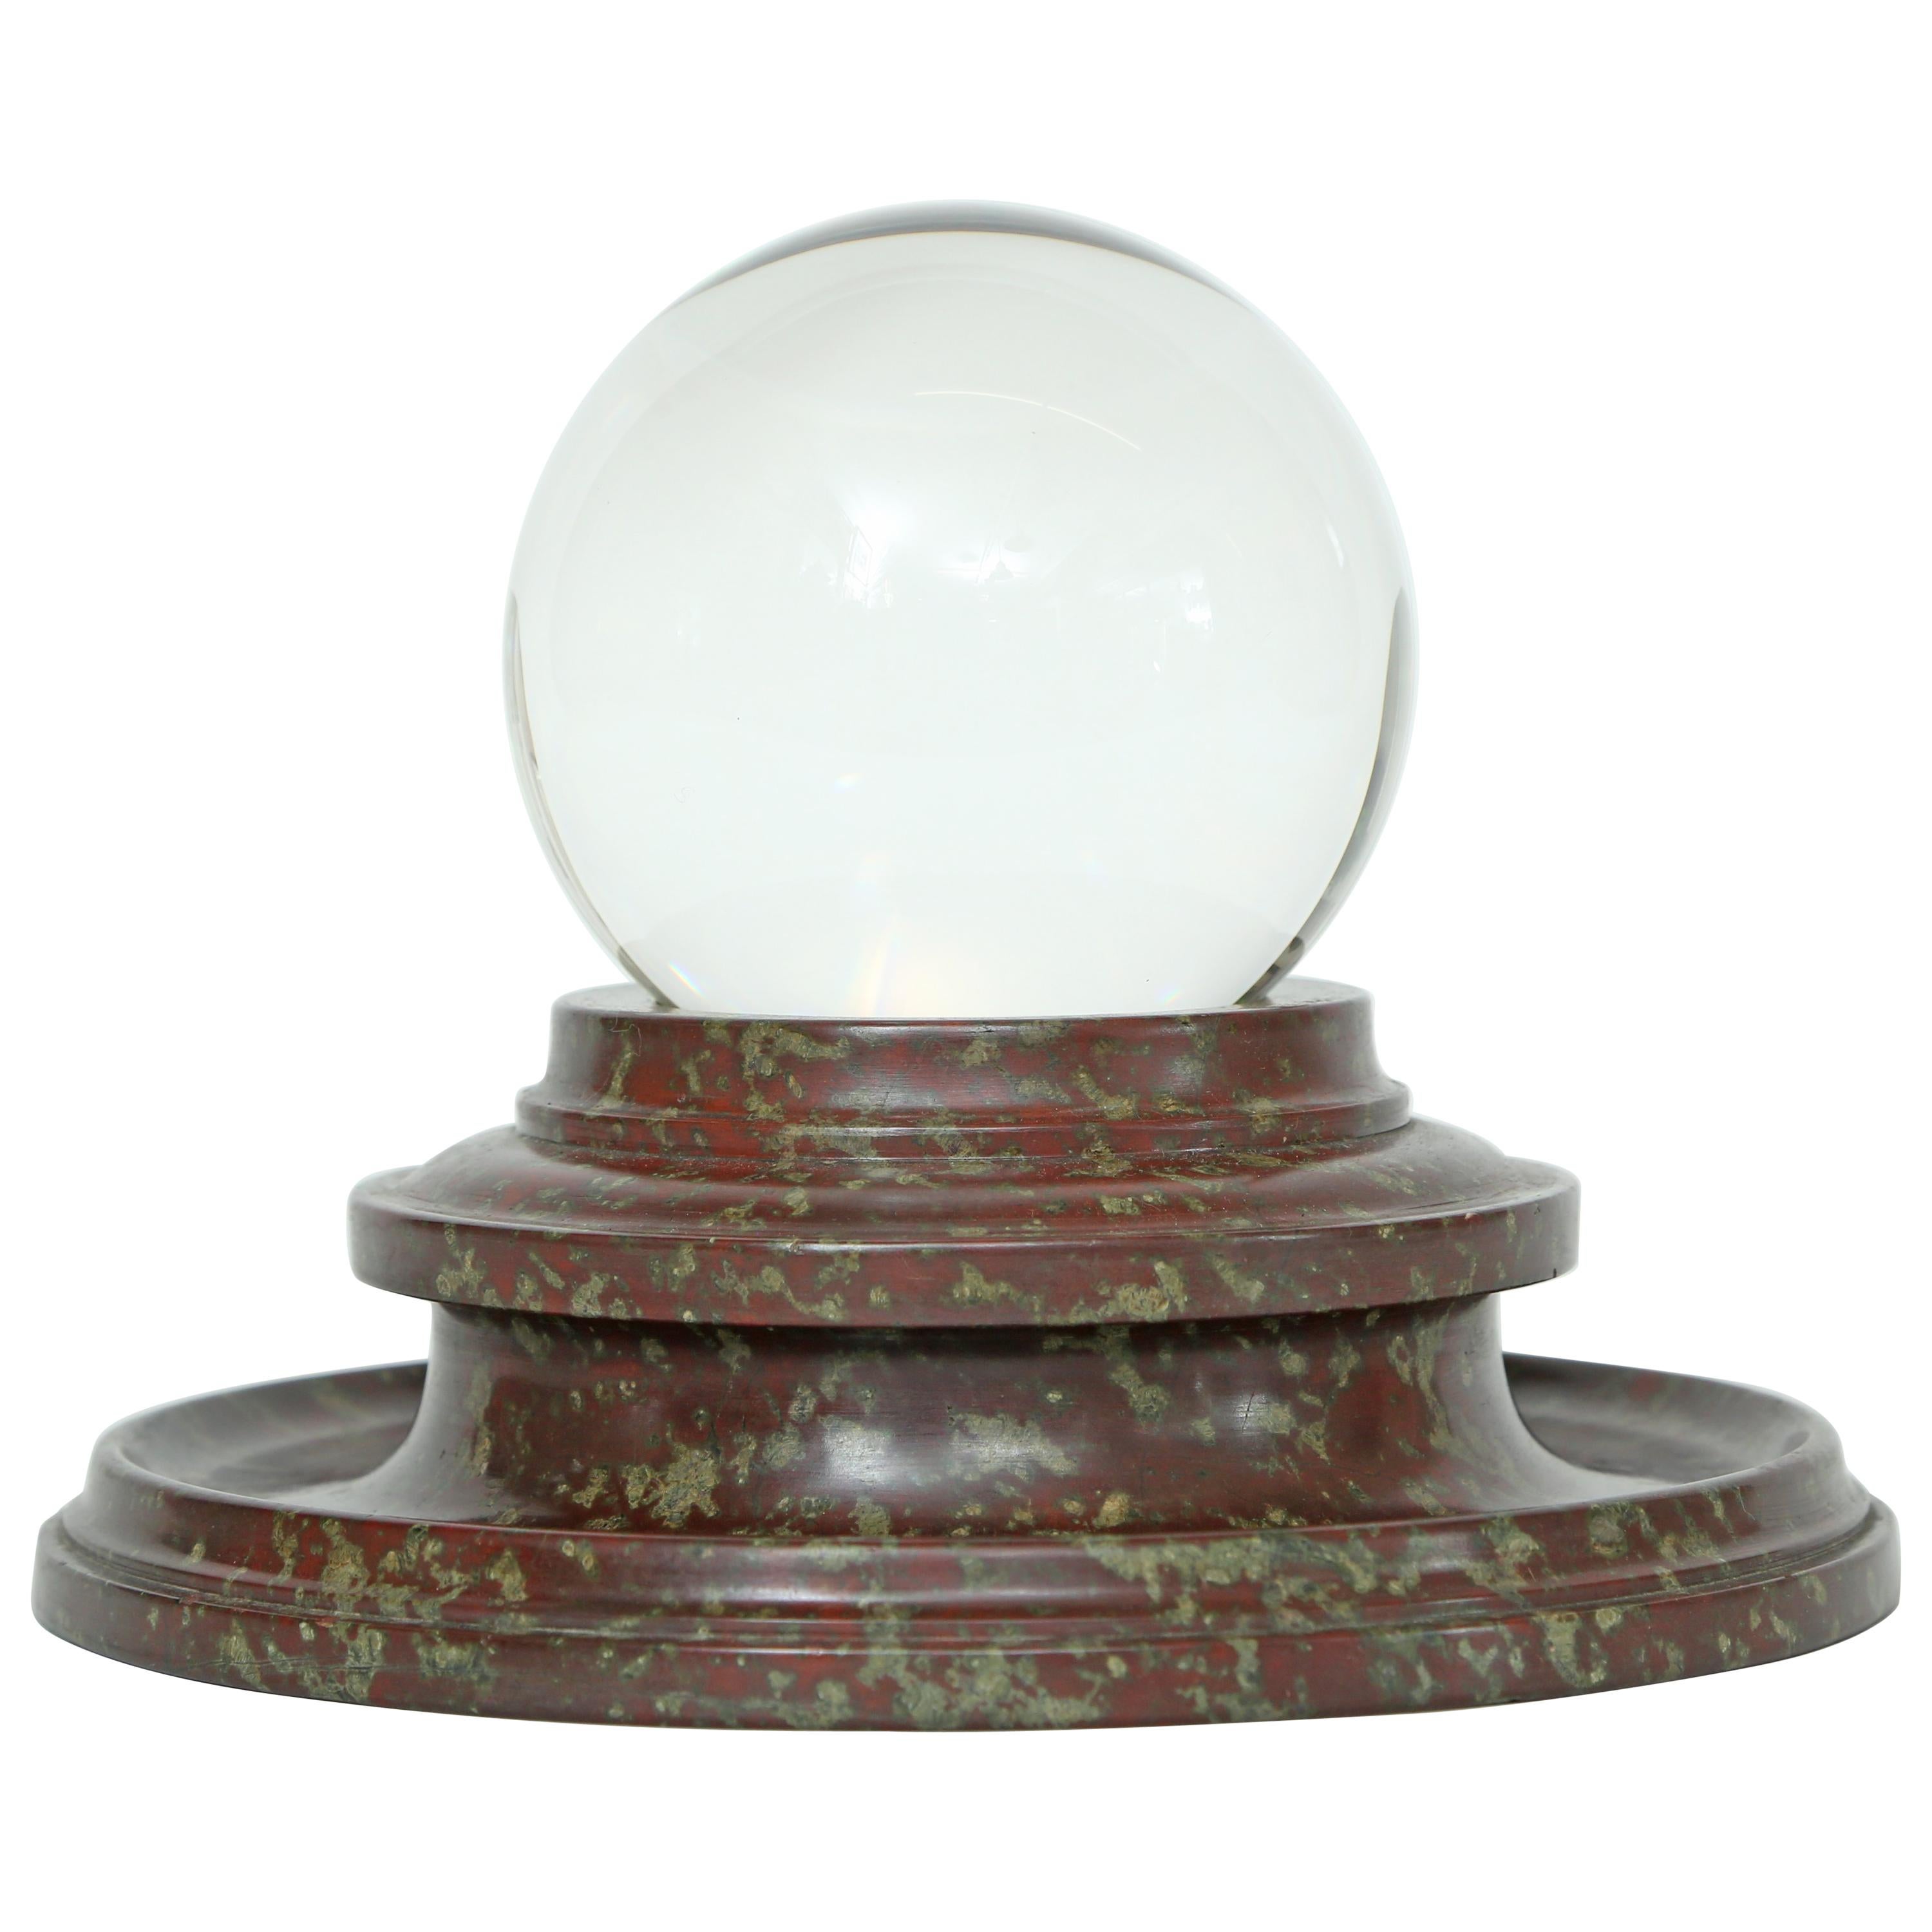  A Crystal Orb Adorning a Lathe Turned Marble Stand 